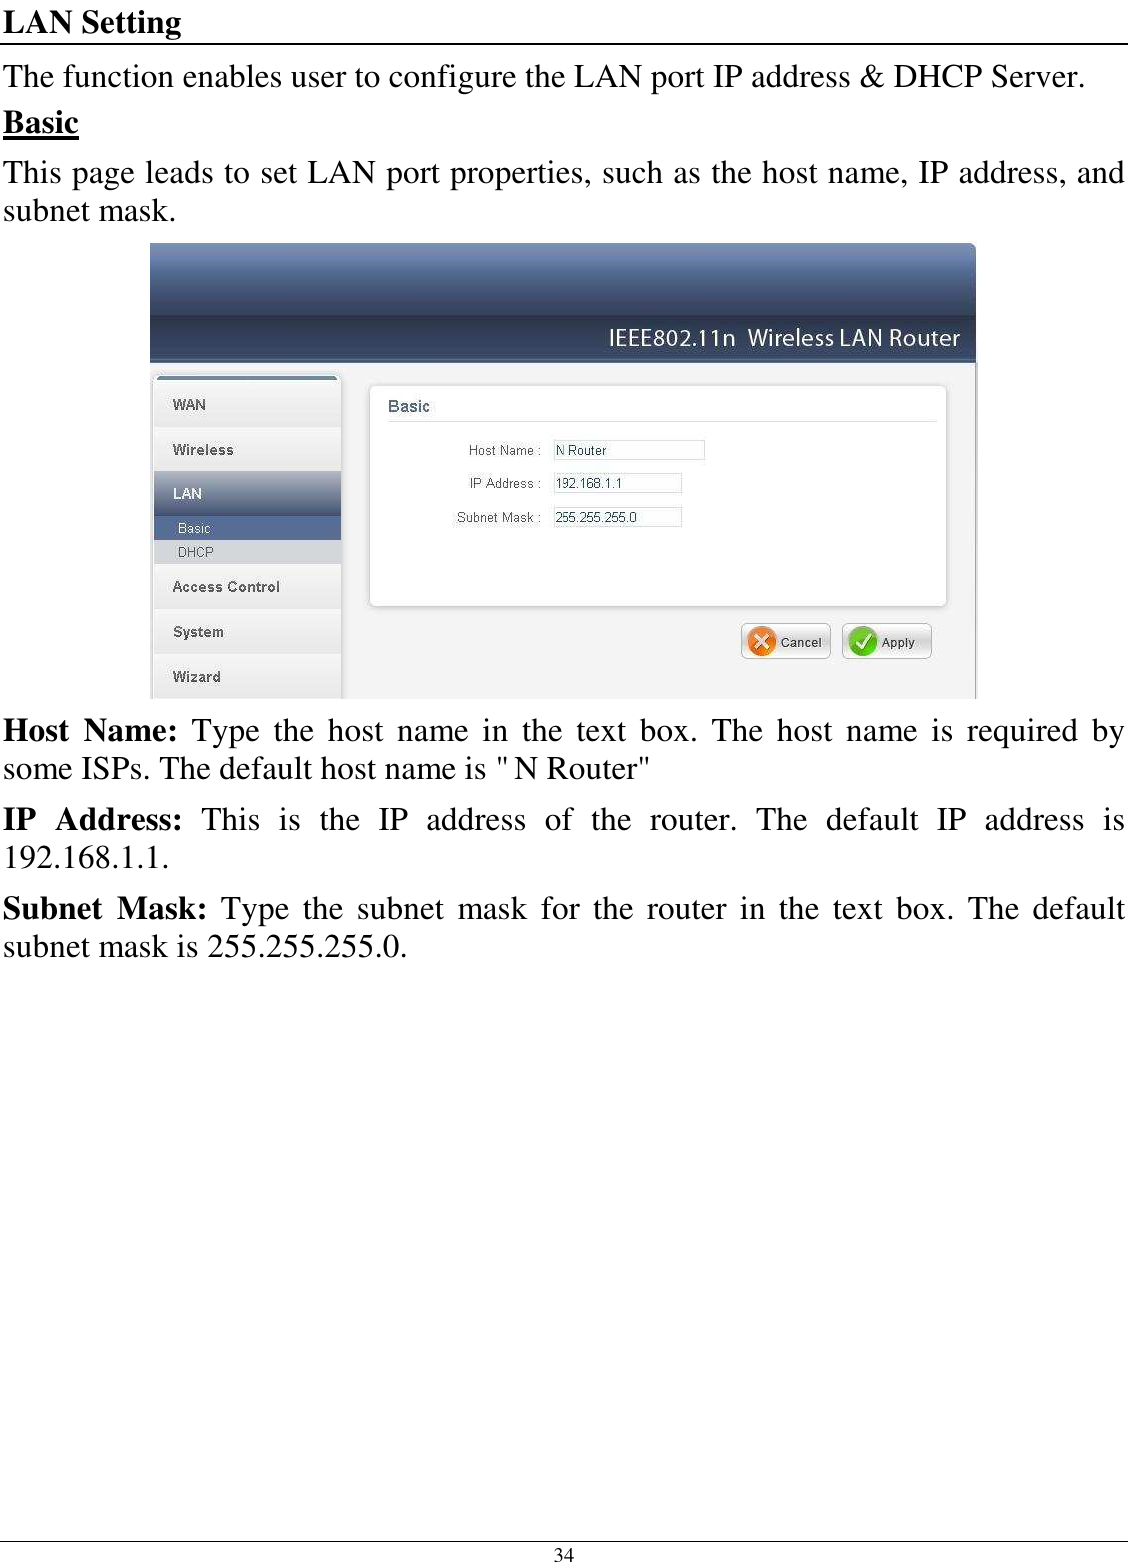 34 LAN Setting The function enables user to configure the LAN port IP address &amp; DHCP Server. Basic This page leads to set LAN port properties, such as the host name, IP address, and subnet mask.  Host  Name:  Type  the  host  name  in  the  text  box.  The  host  name  is  required  by some ISPs. The default host name is &quot; N Router&quot; IP  Address:  This  is  the  IP  address  of  the  router.  The  default  IP  address  is 192.168.1.1. Subnet  Mask:  Type  the  subnet  mask  for the  router  in the  text box. The  default subnet mask is 255.255.255.0.   